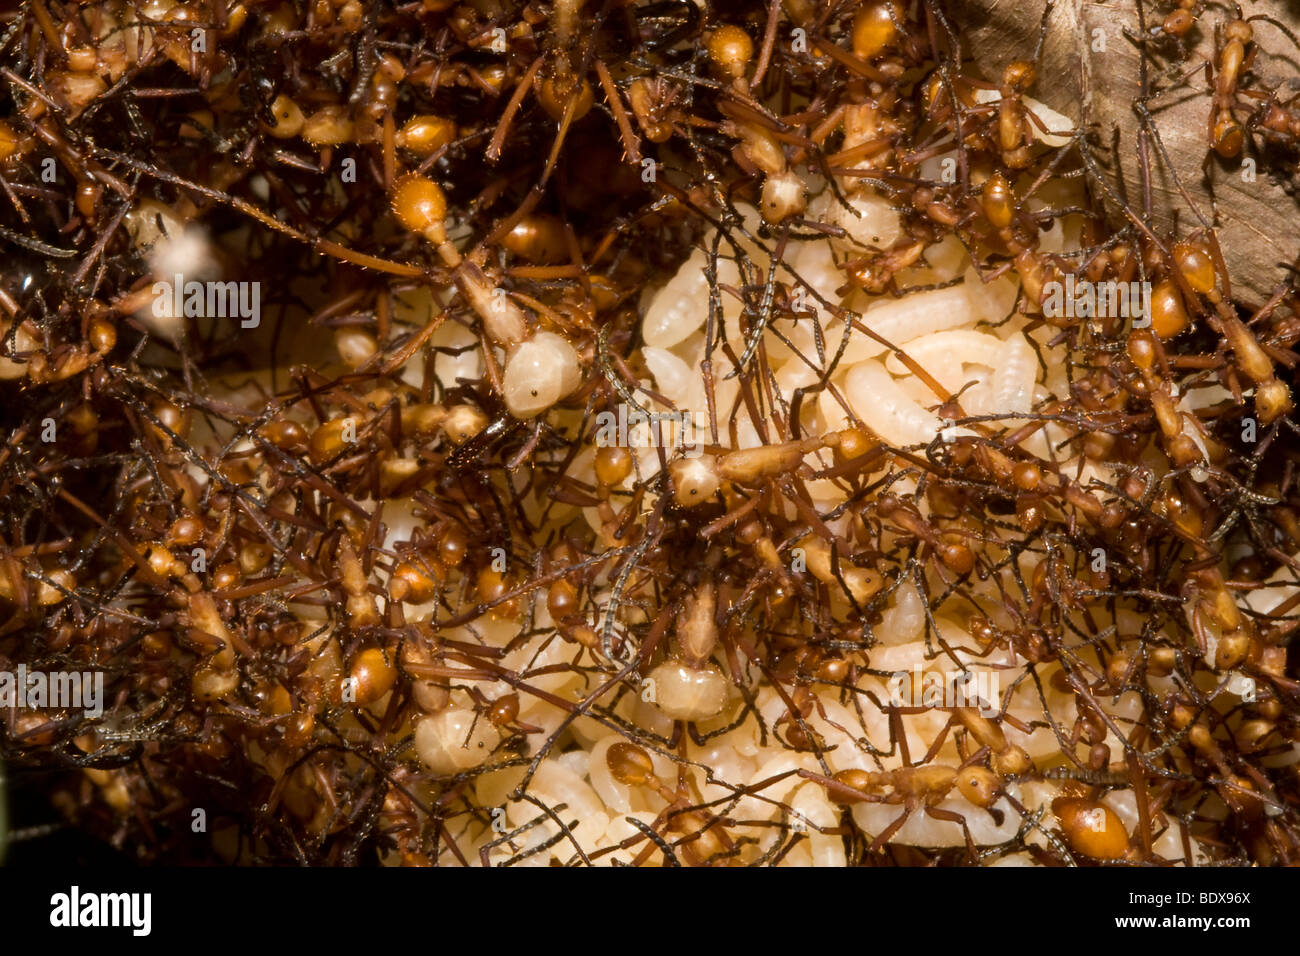 Army ants on the move. Order Hymenoptera, family Formicidae. Photographed in Costa Rica. Stock Photo